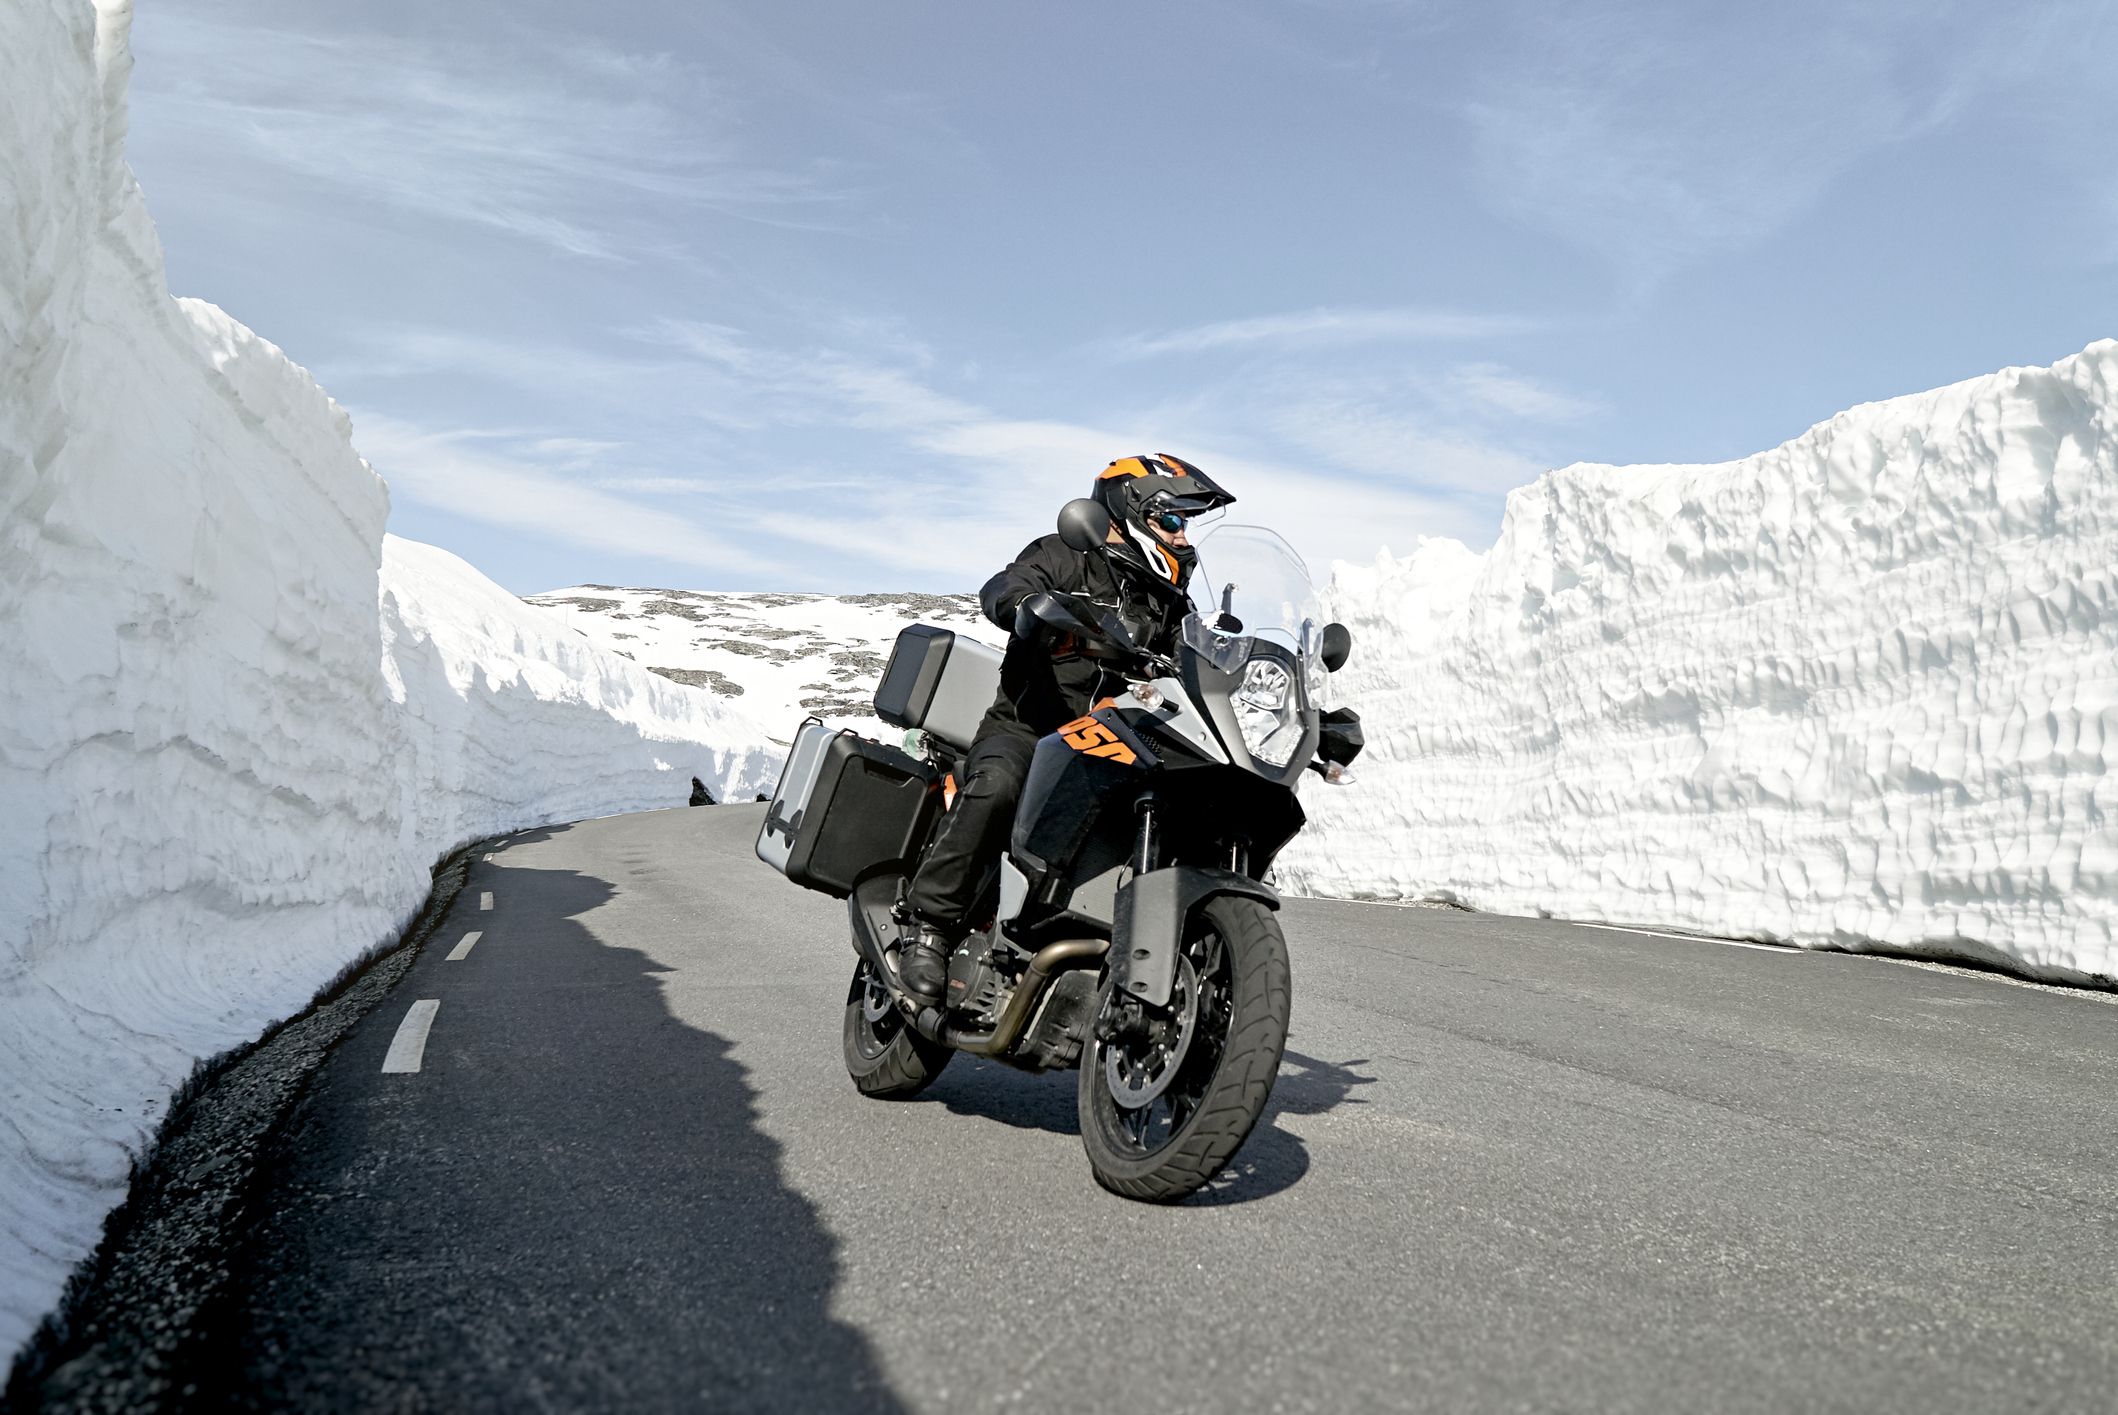 The Best Cold Weather Motorcycle Gear